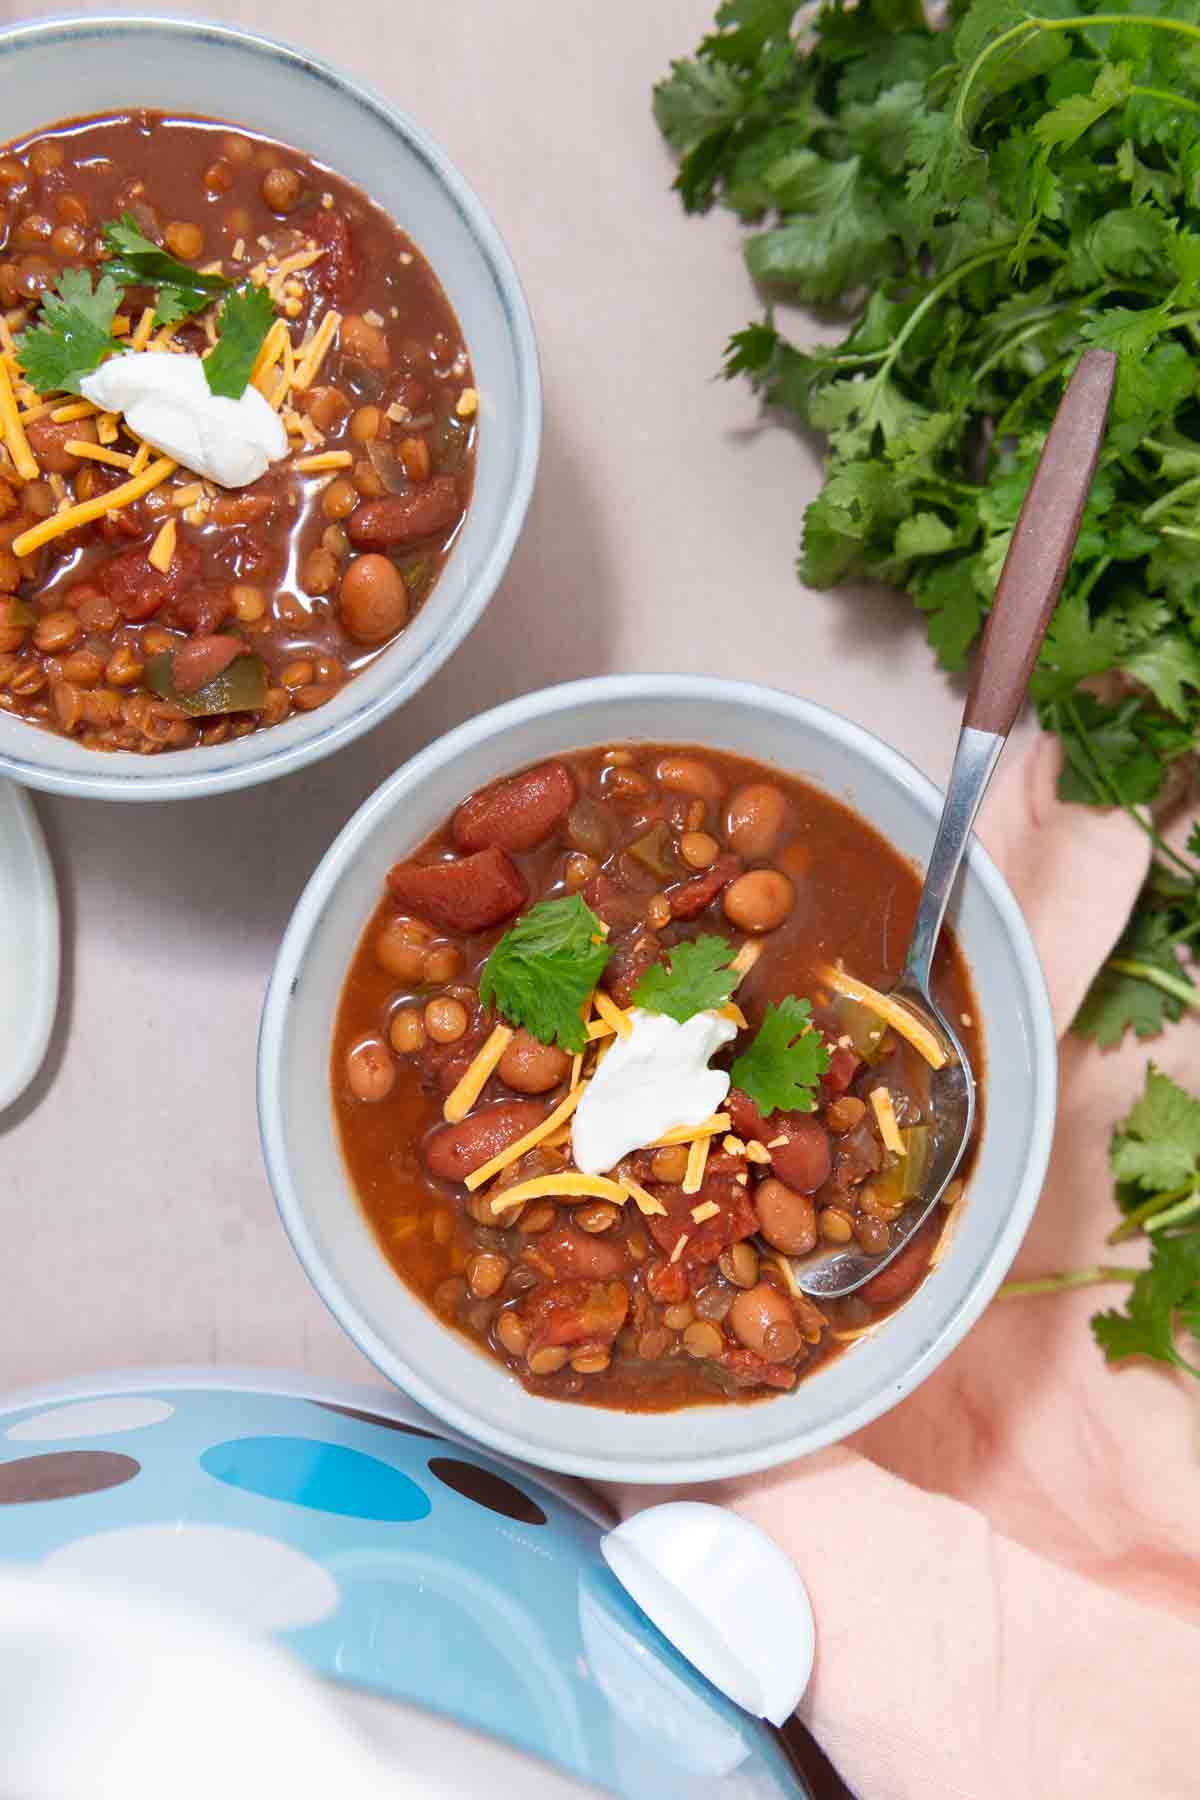 Two bowls of lentil chili next to cilantro and a blue crockpot.